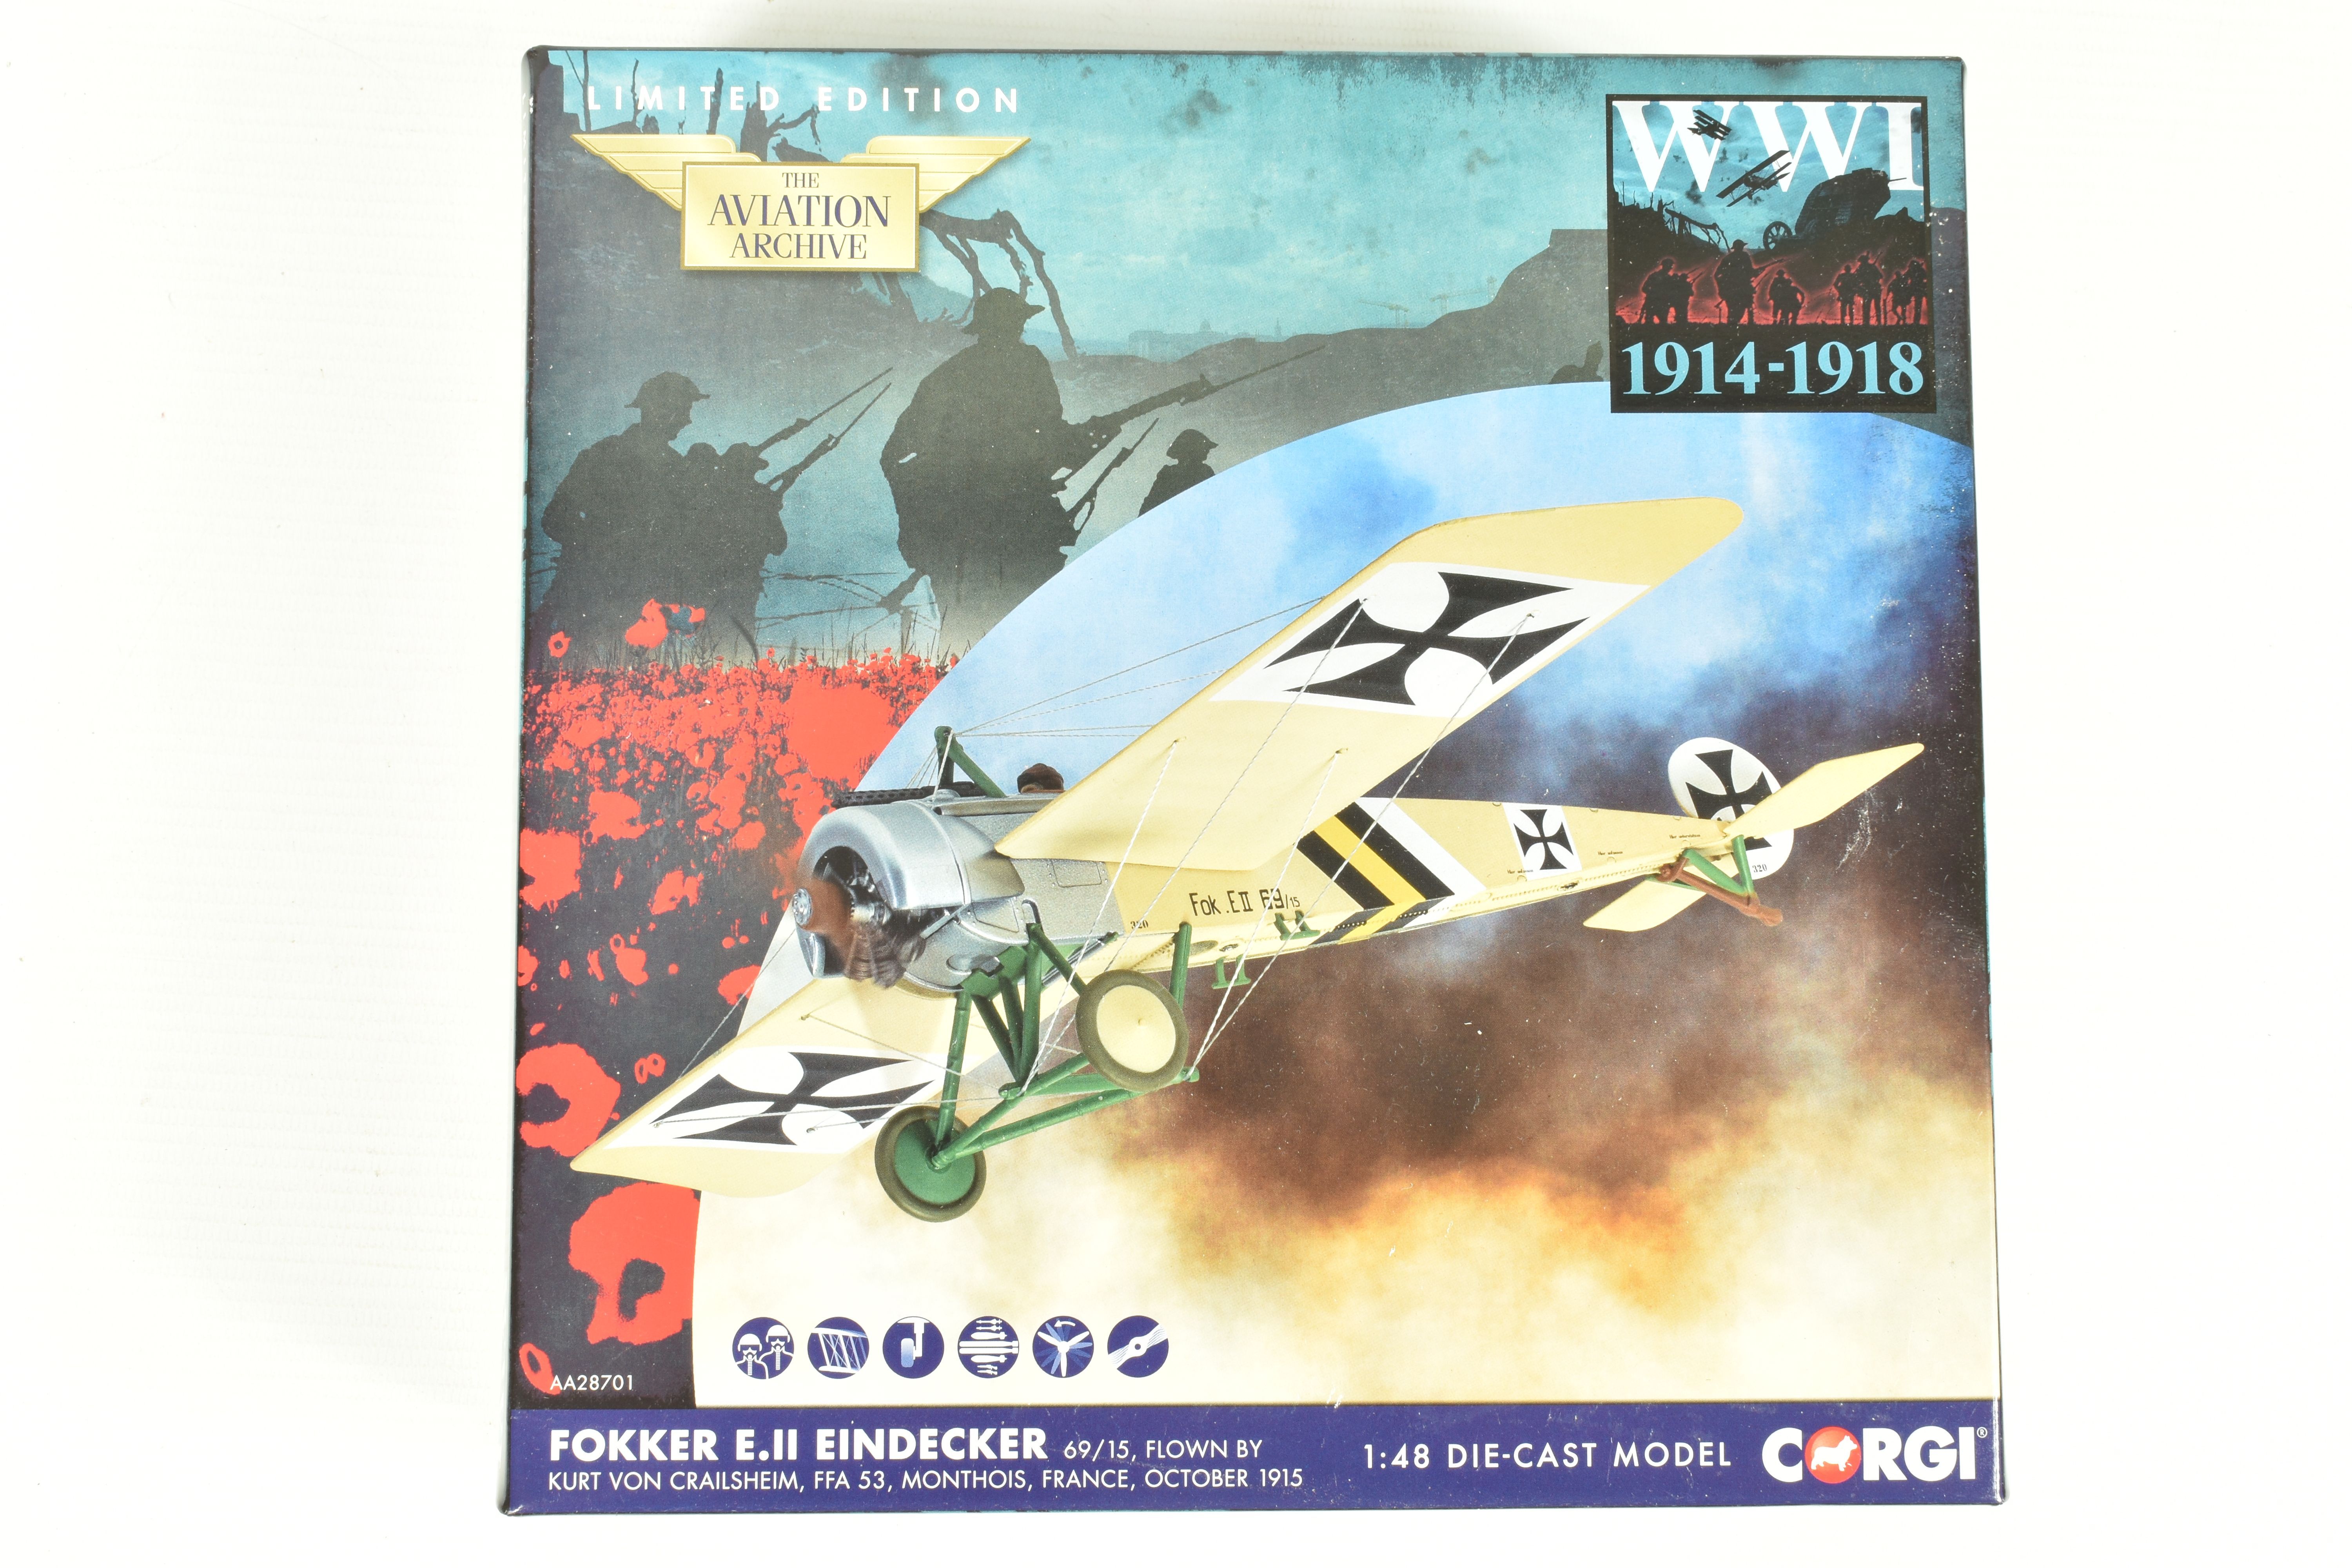 THREE BOXED LIMITED EDITION 1:48 SCALE CORGI AVIATION ARCHIVE DIECAST MODEL AIRCRAFTS, the first - Image 8 of 10